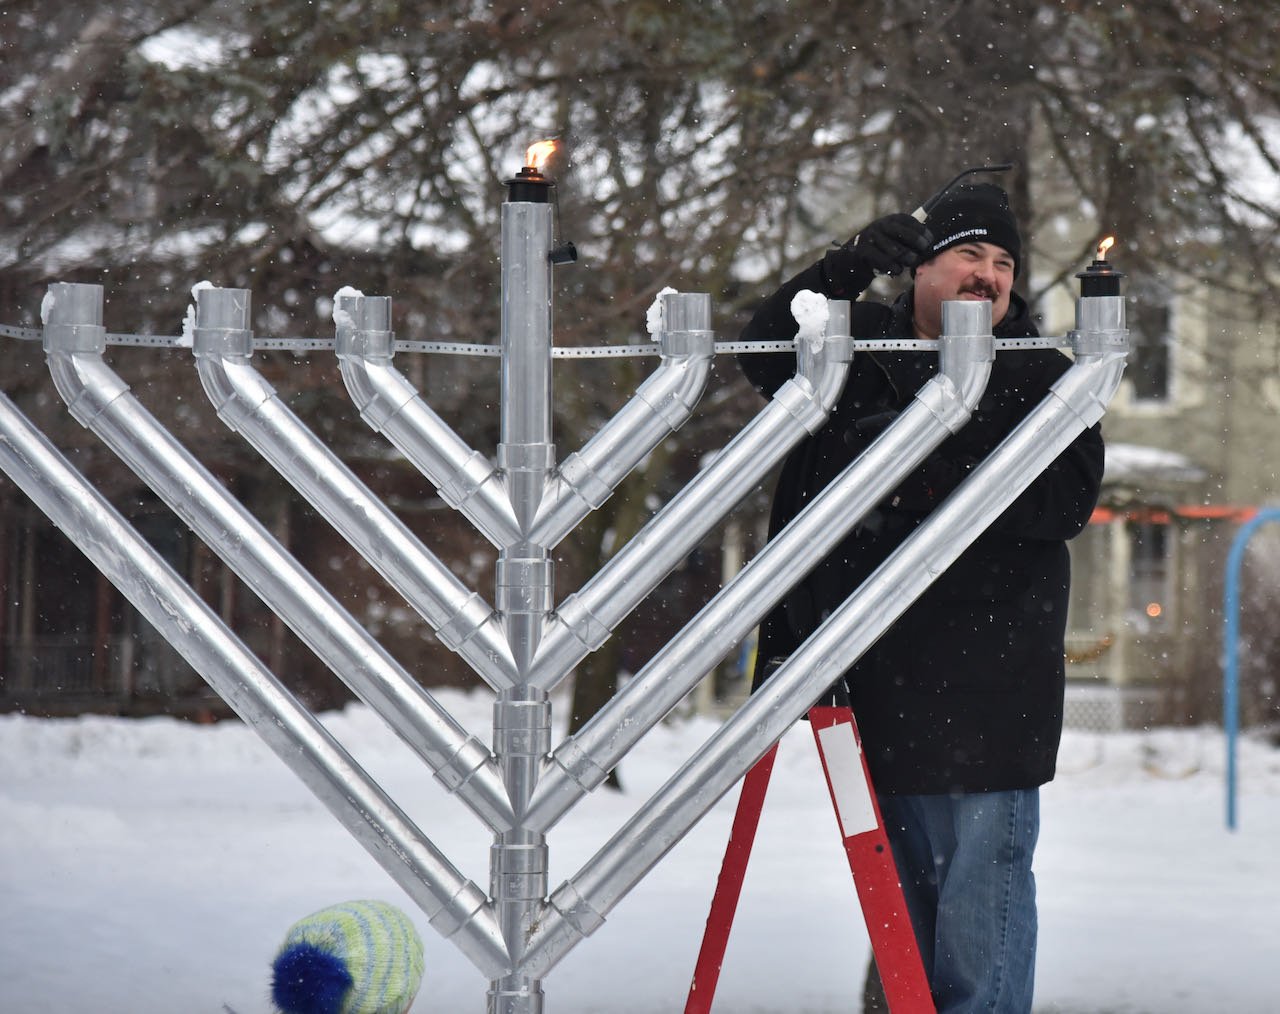   Eric Friedman lights the menorah. Another light is added each day at sunset until Dec. 25. Photo by Gordon Miller  